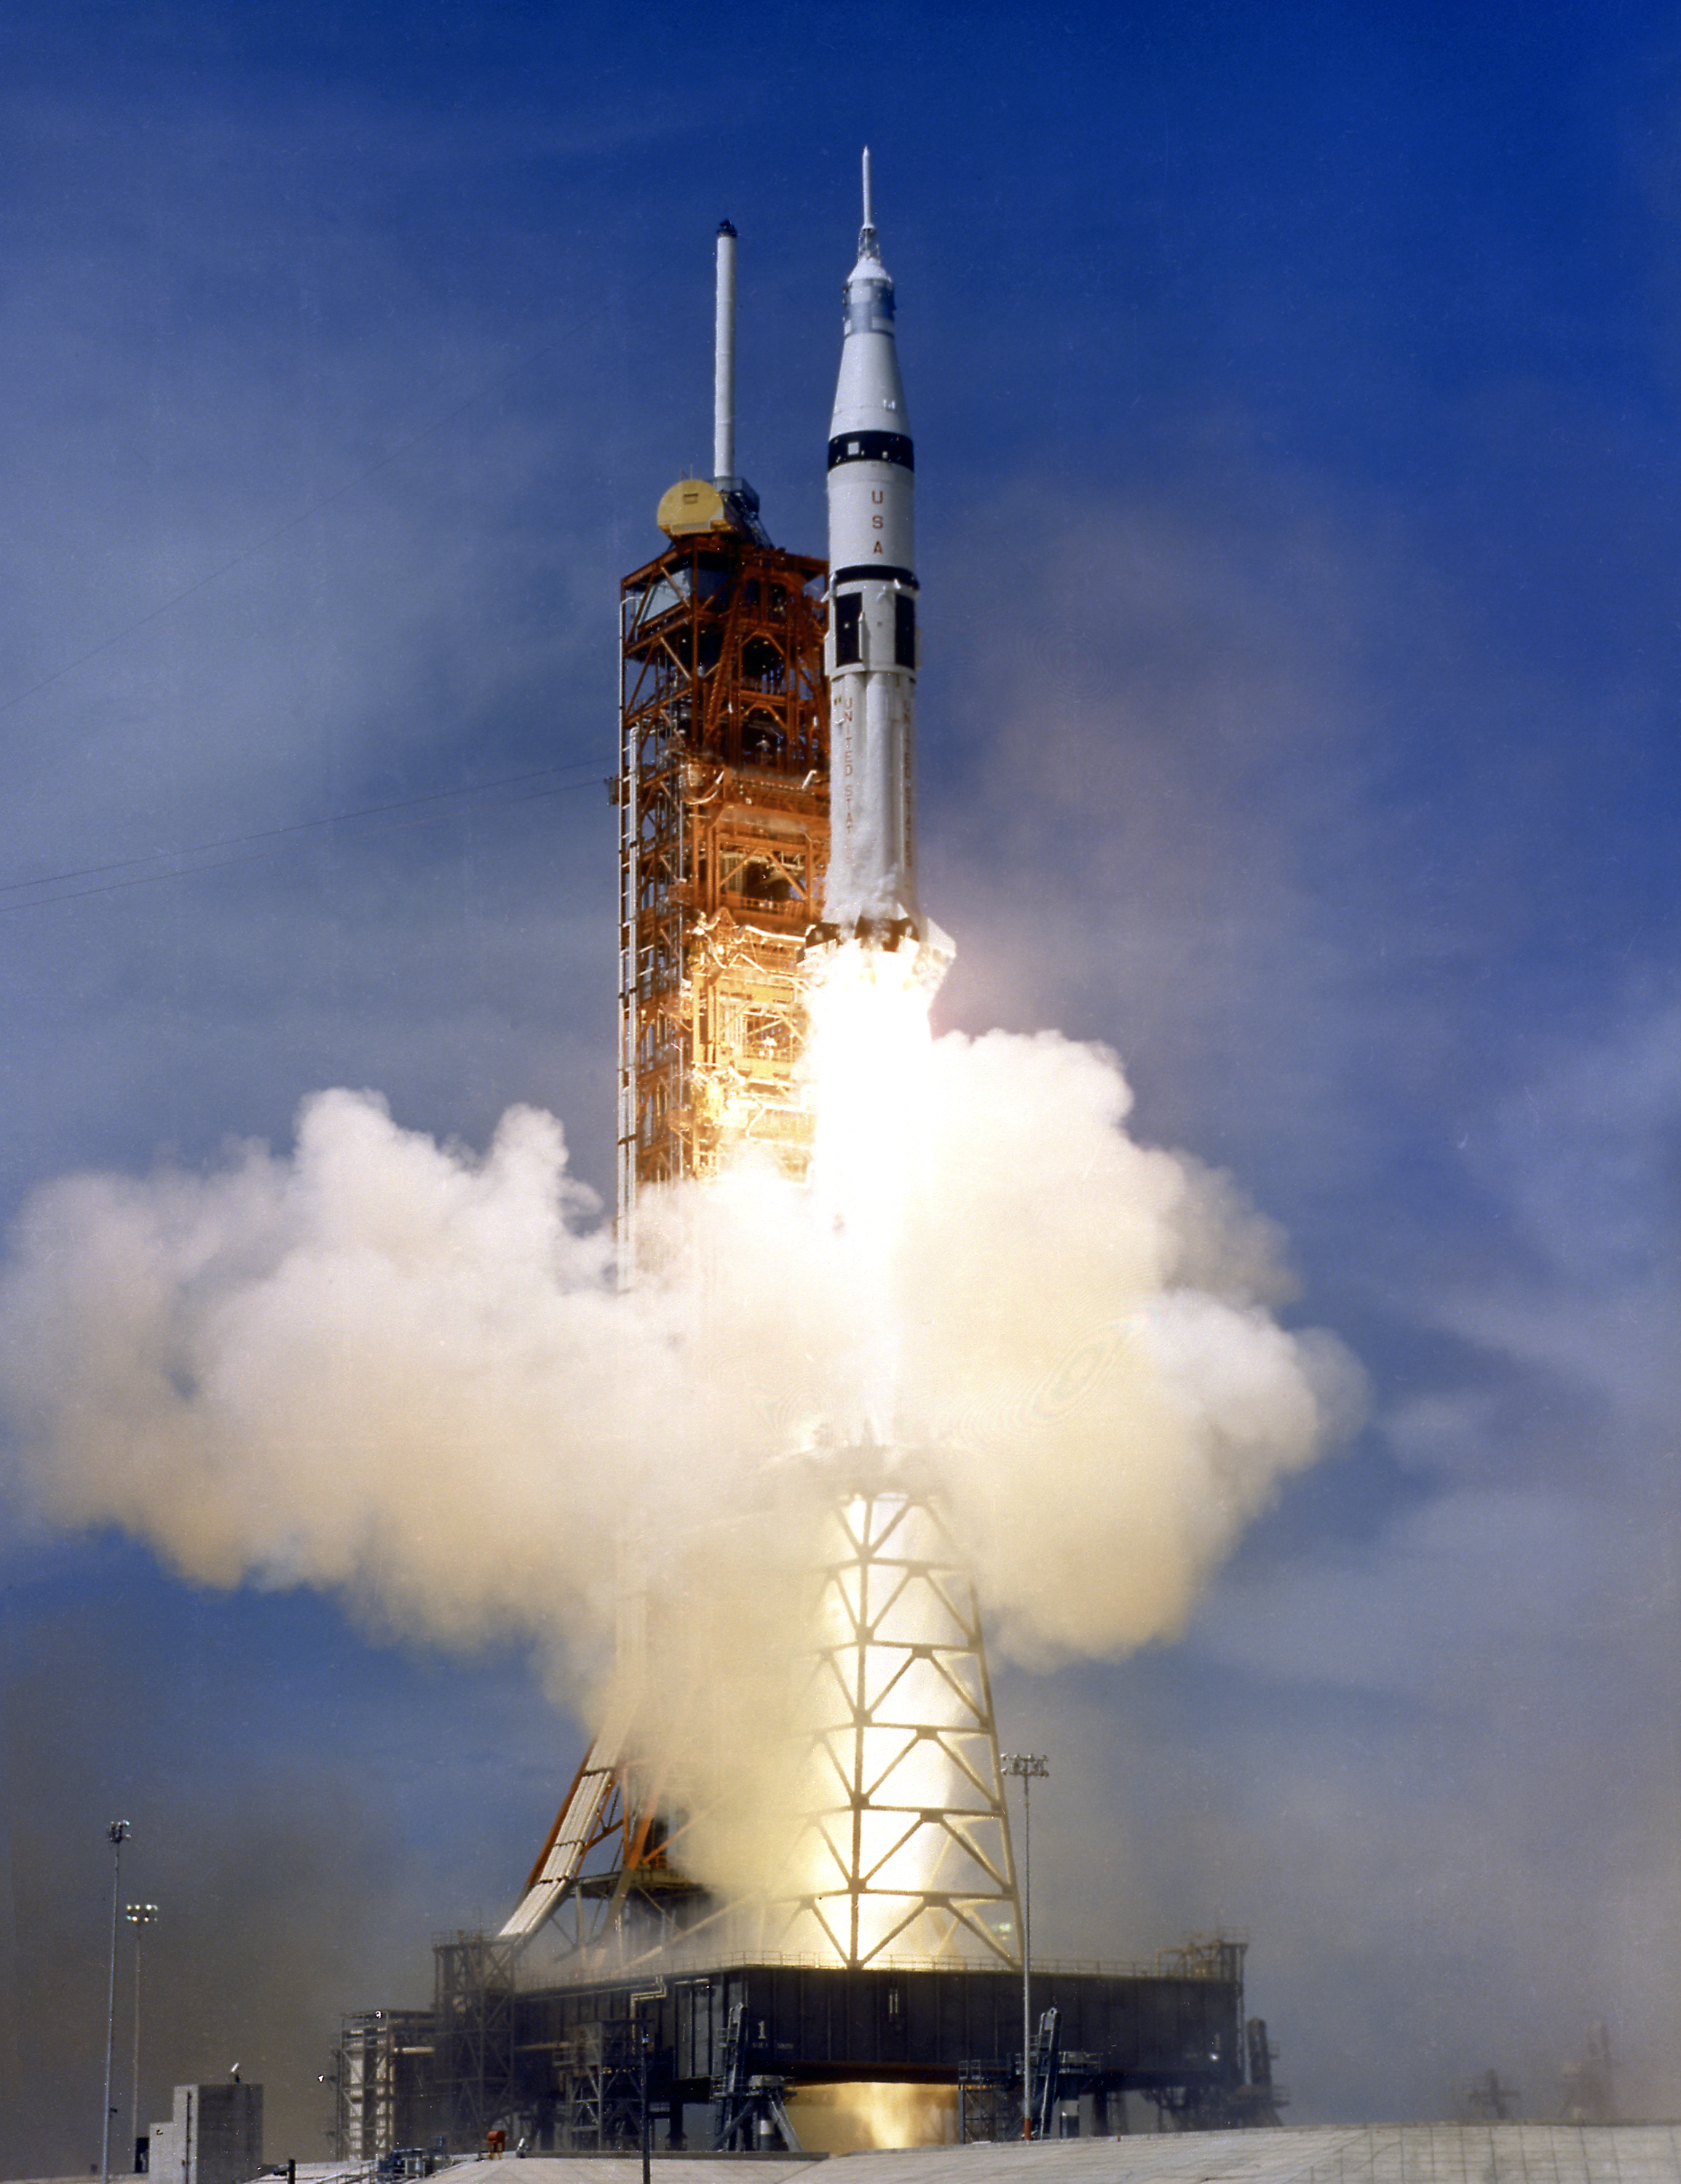 The Saturn IB launch vehicle lifts the American crew into orbit on July 15, 1975.